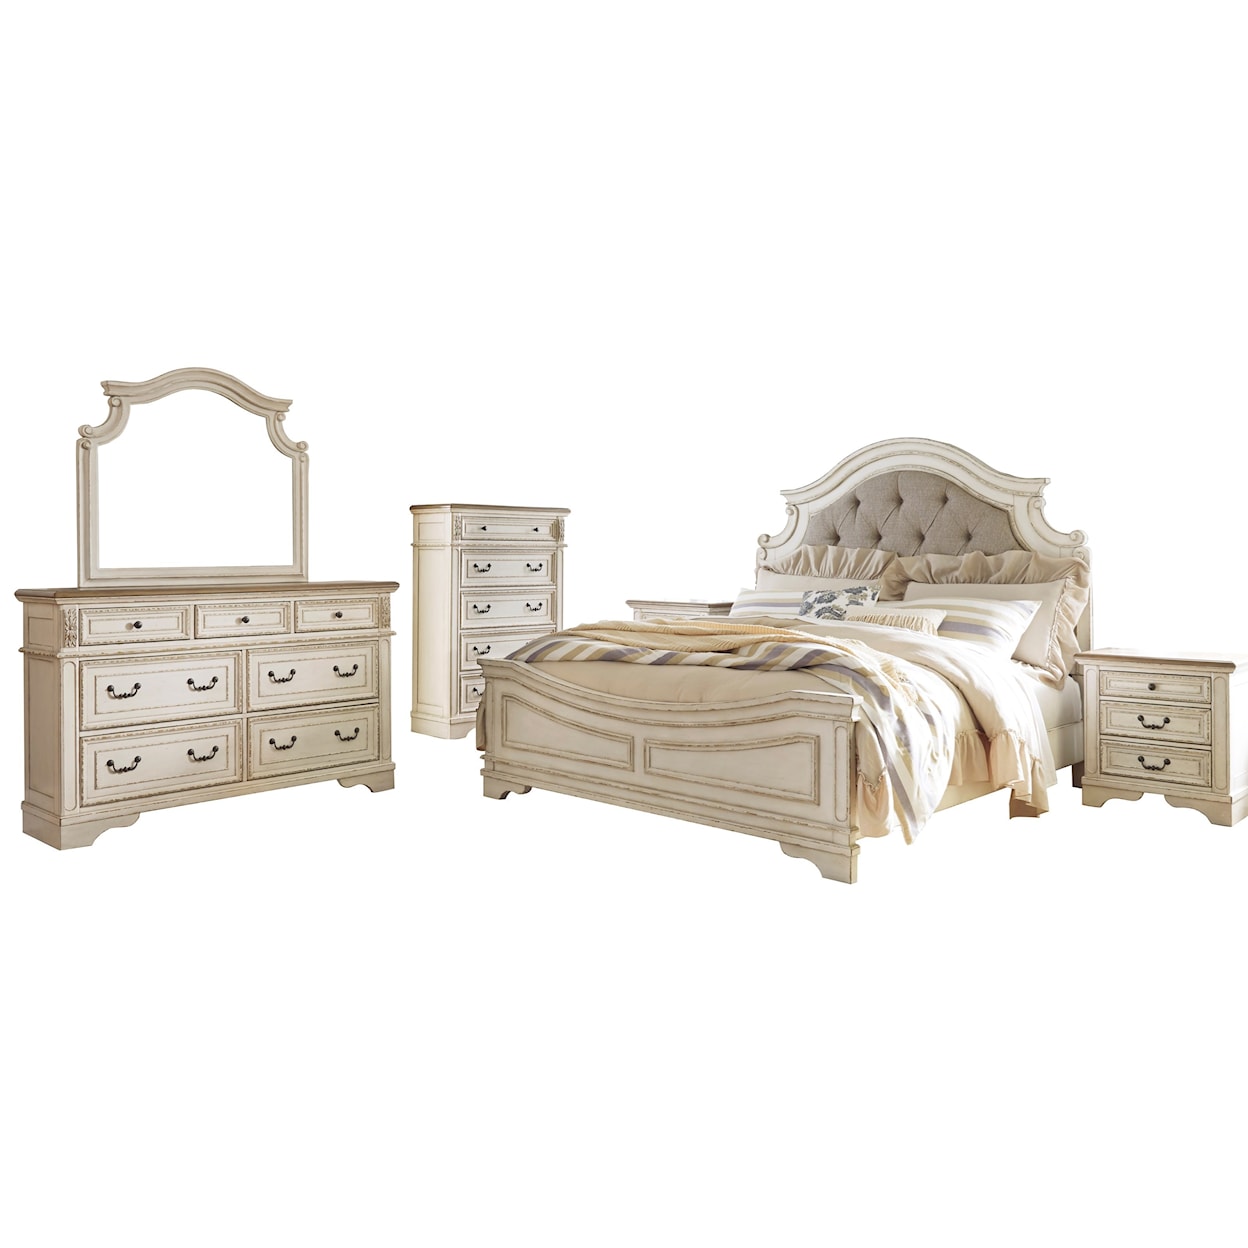 Signature Design by Ashley Realyn 7pc King Bedroom Group